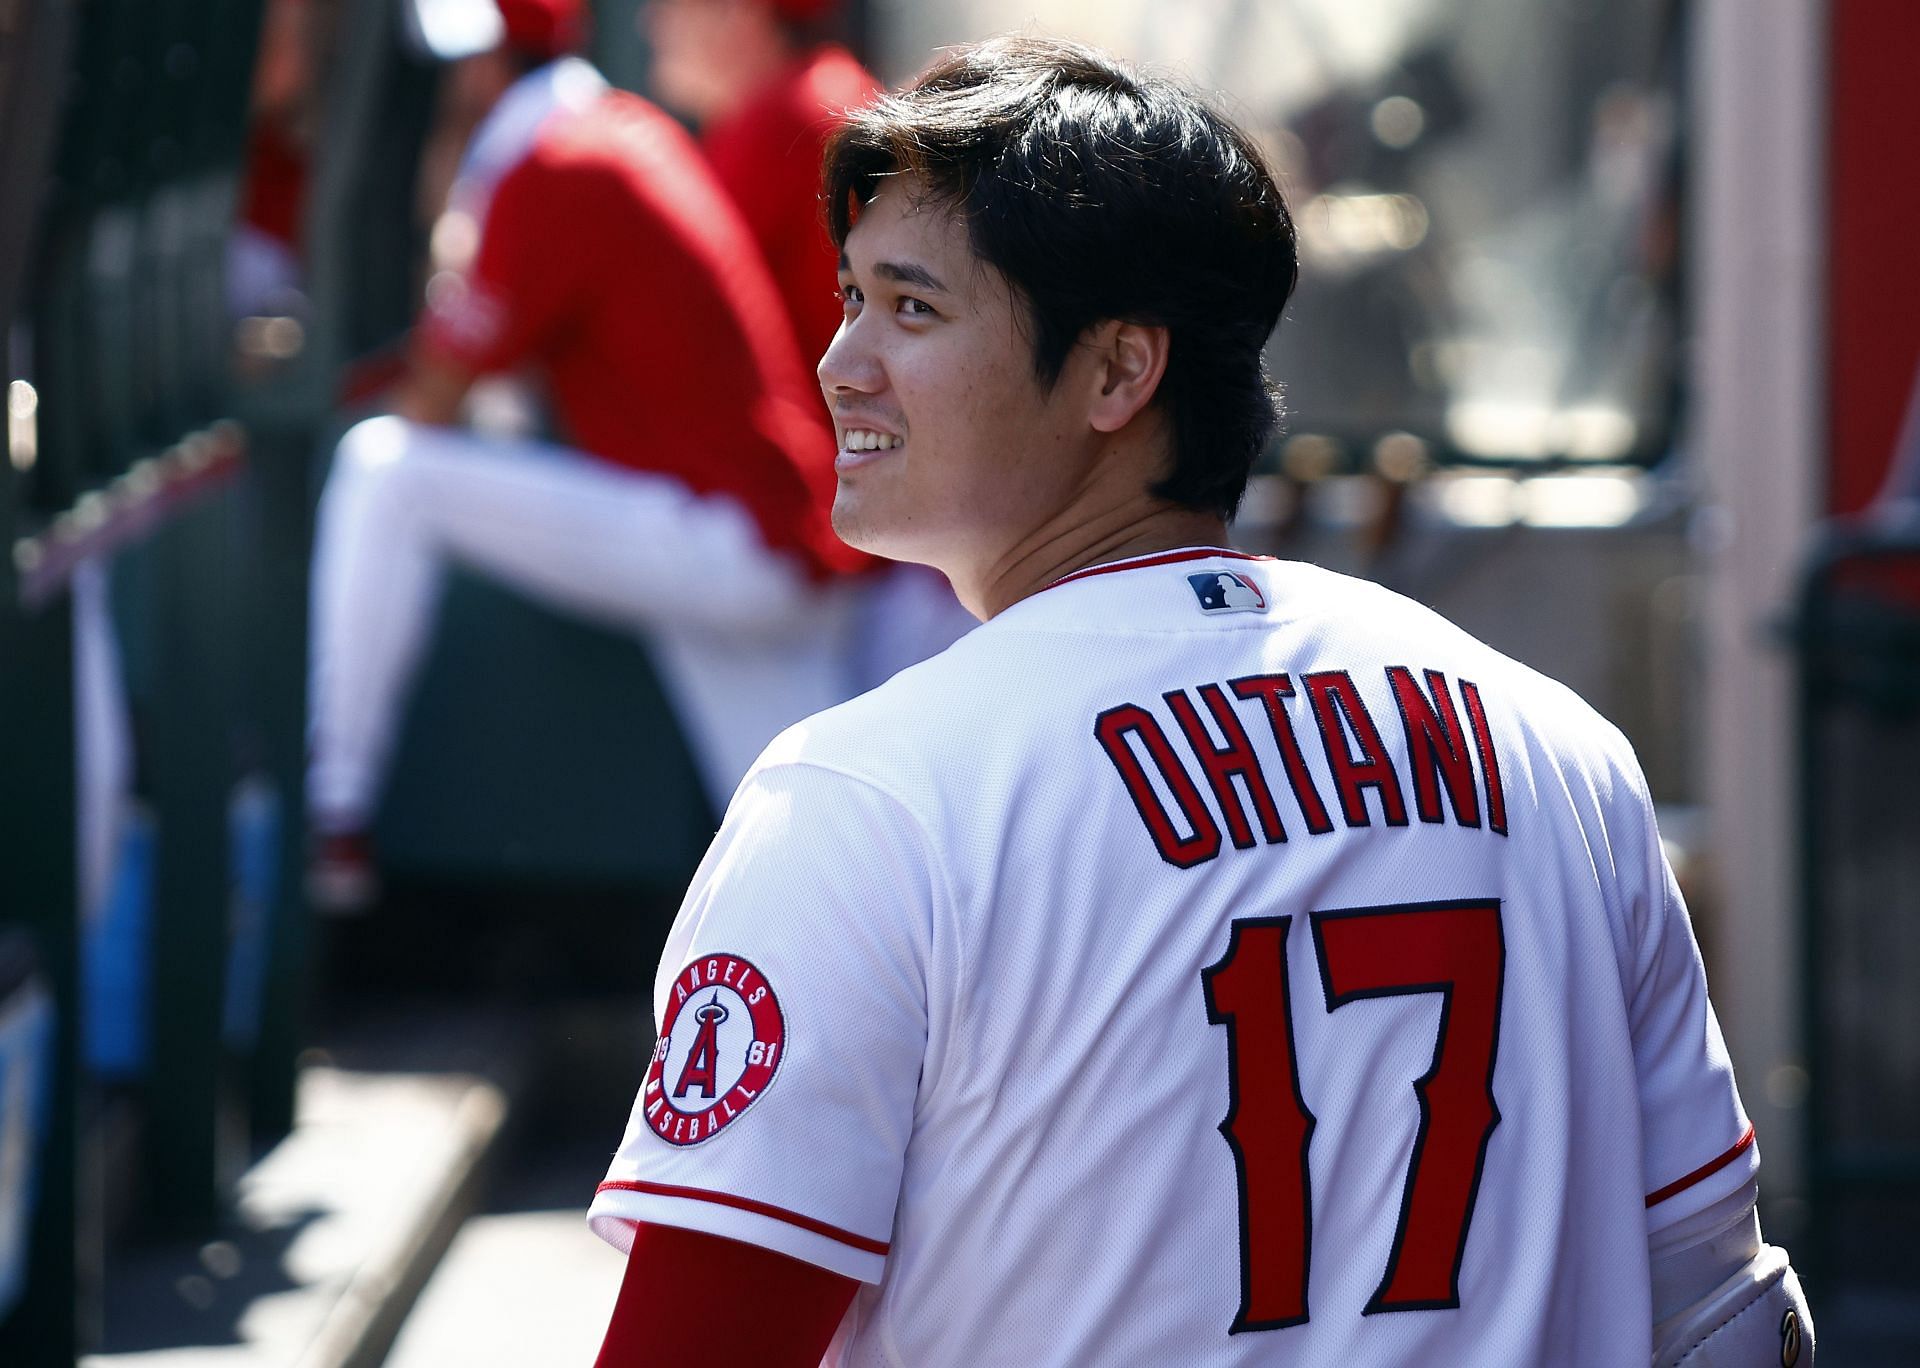 Shohei Ohtani Becomes First Japanese Player to Have Best-Selling MLB Jersey  - BVM Sports